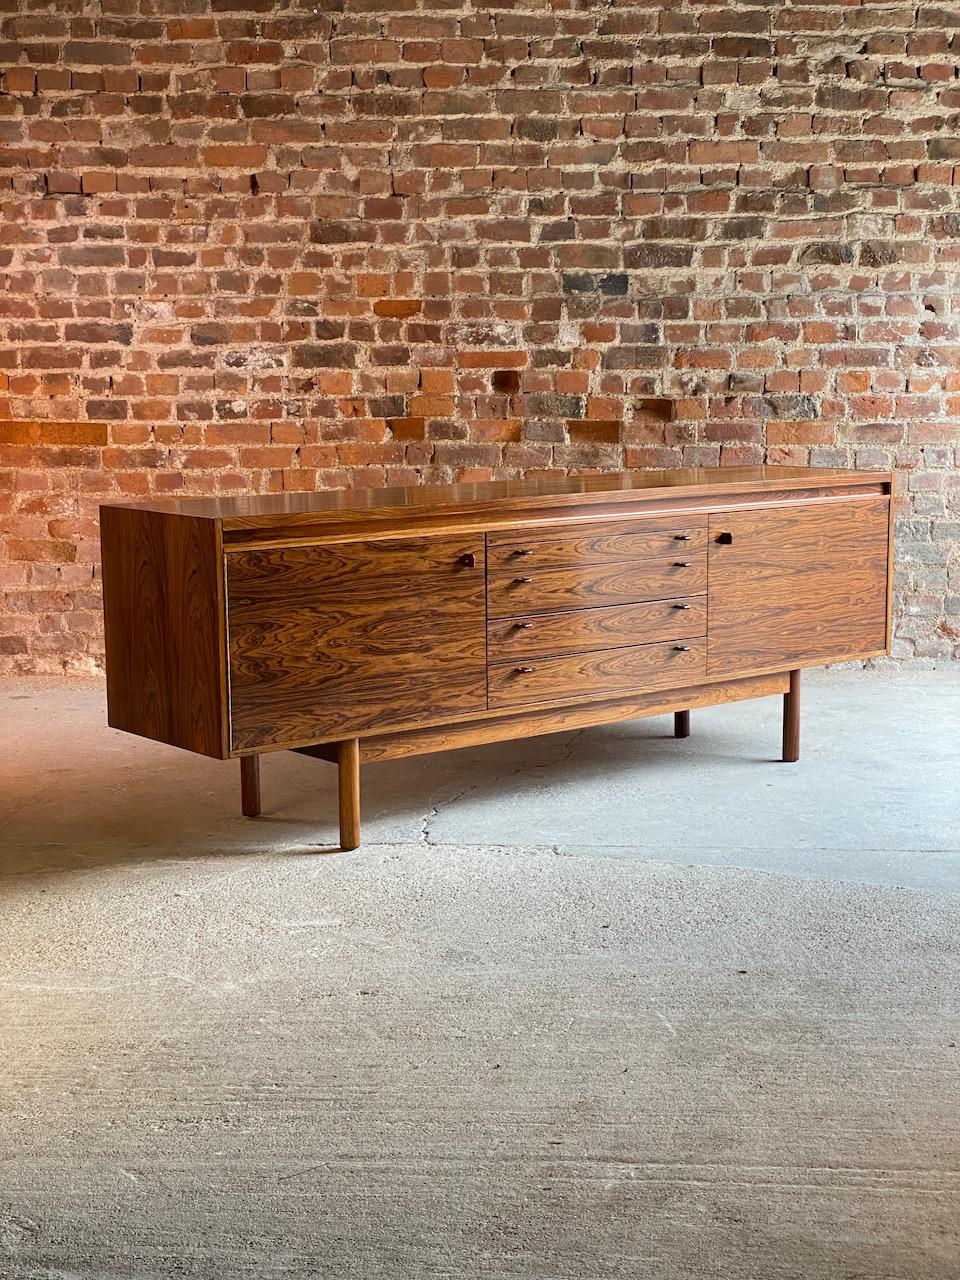 Robert Heritage Granville rosewood sideboard by Archie Shine Circa 1969

Magnificent Robert Heritage Granville Rosewood Sideboard by Archie Shine circa 1969, this rare and highly sought after sideboard with its wonderful figured Brazilian rosewood